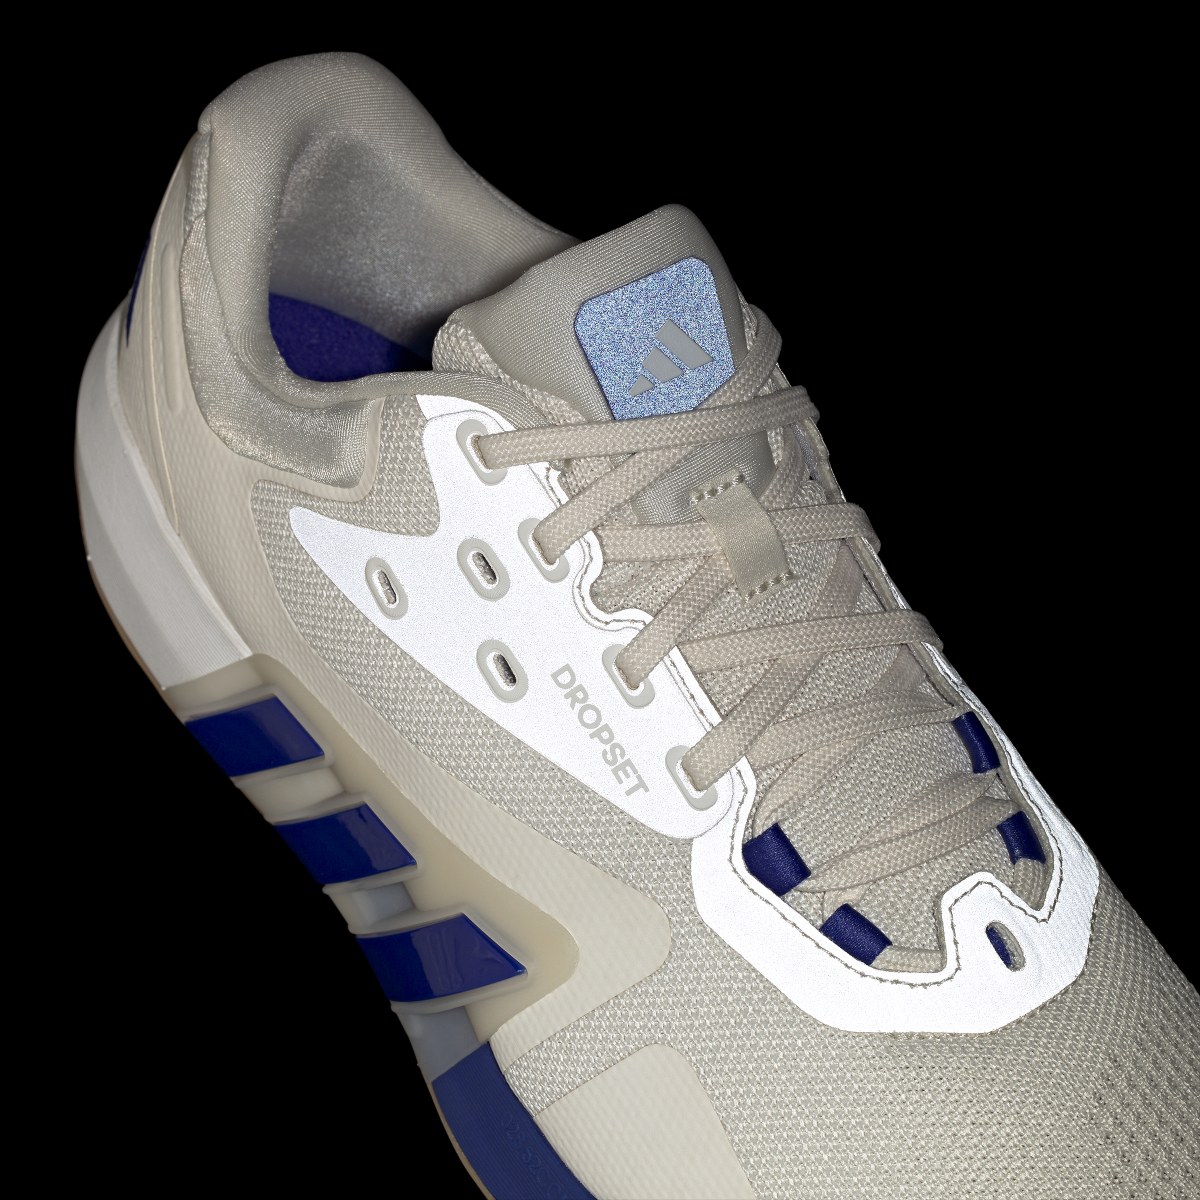 Adidas Dropset Trainer Shoes. 12